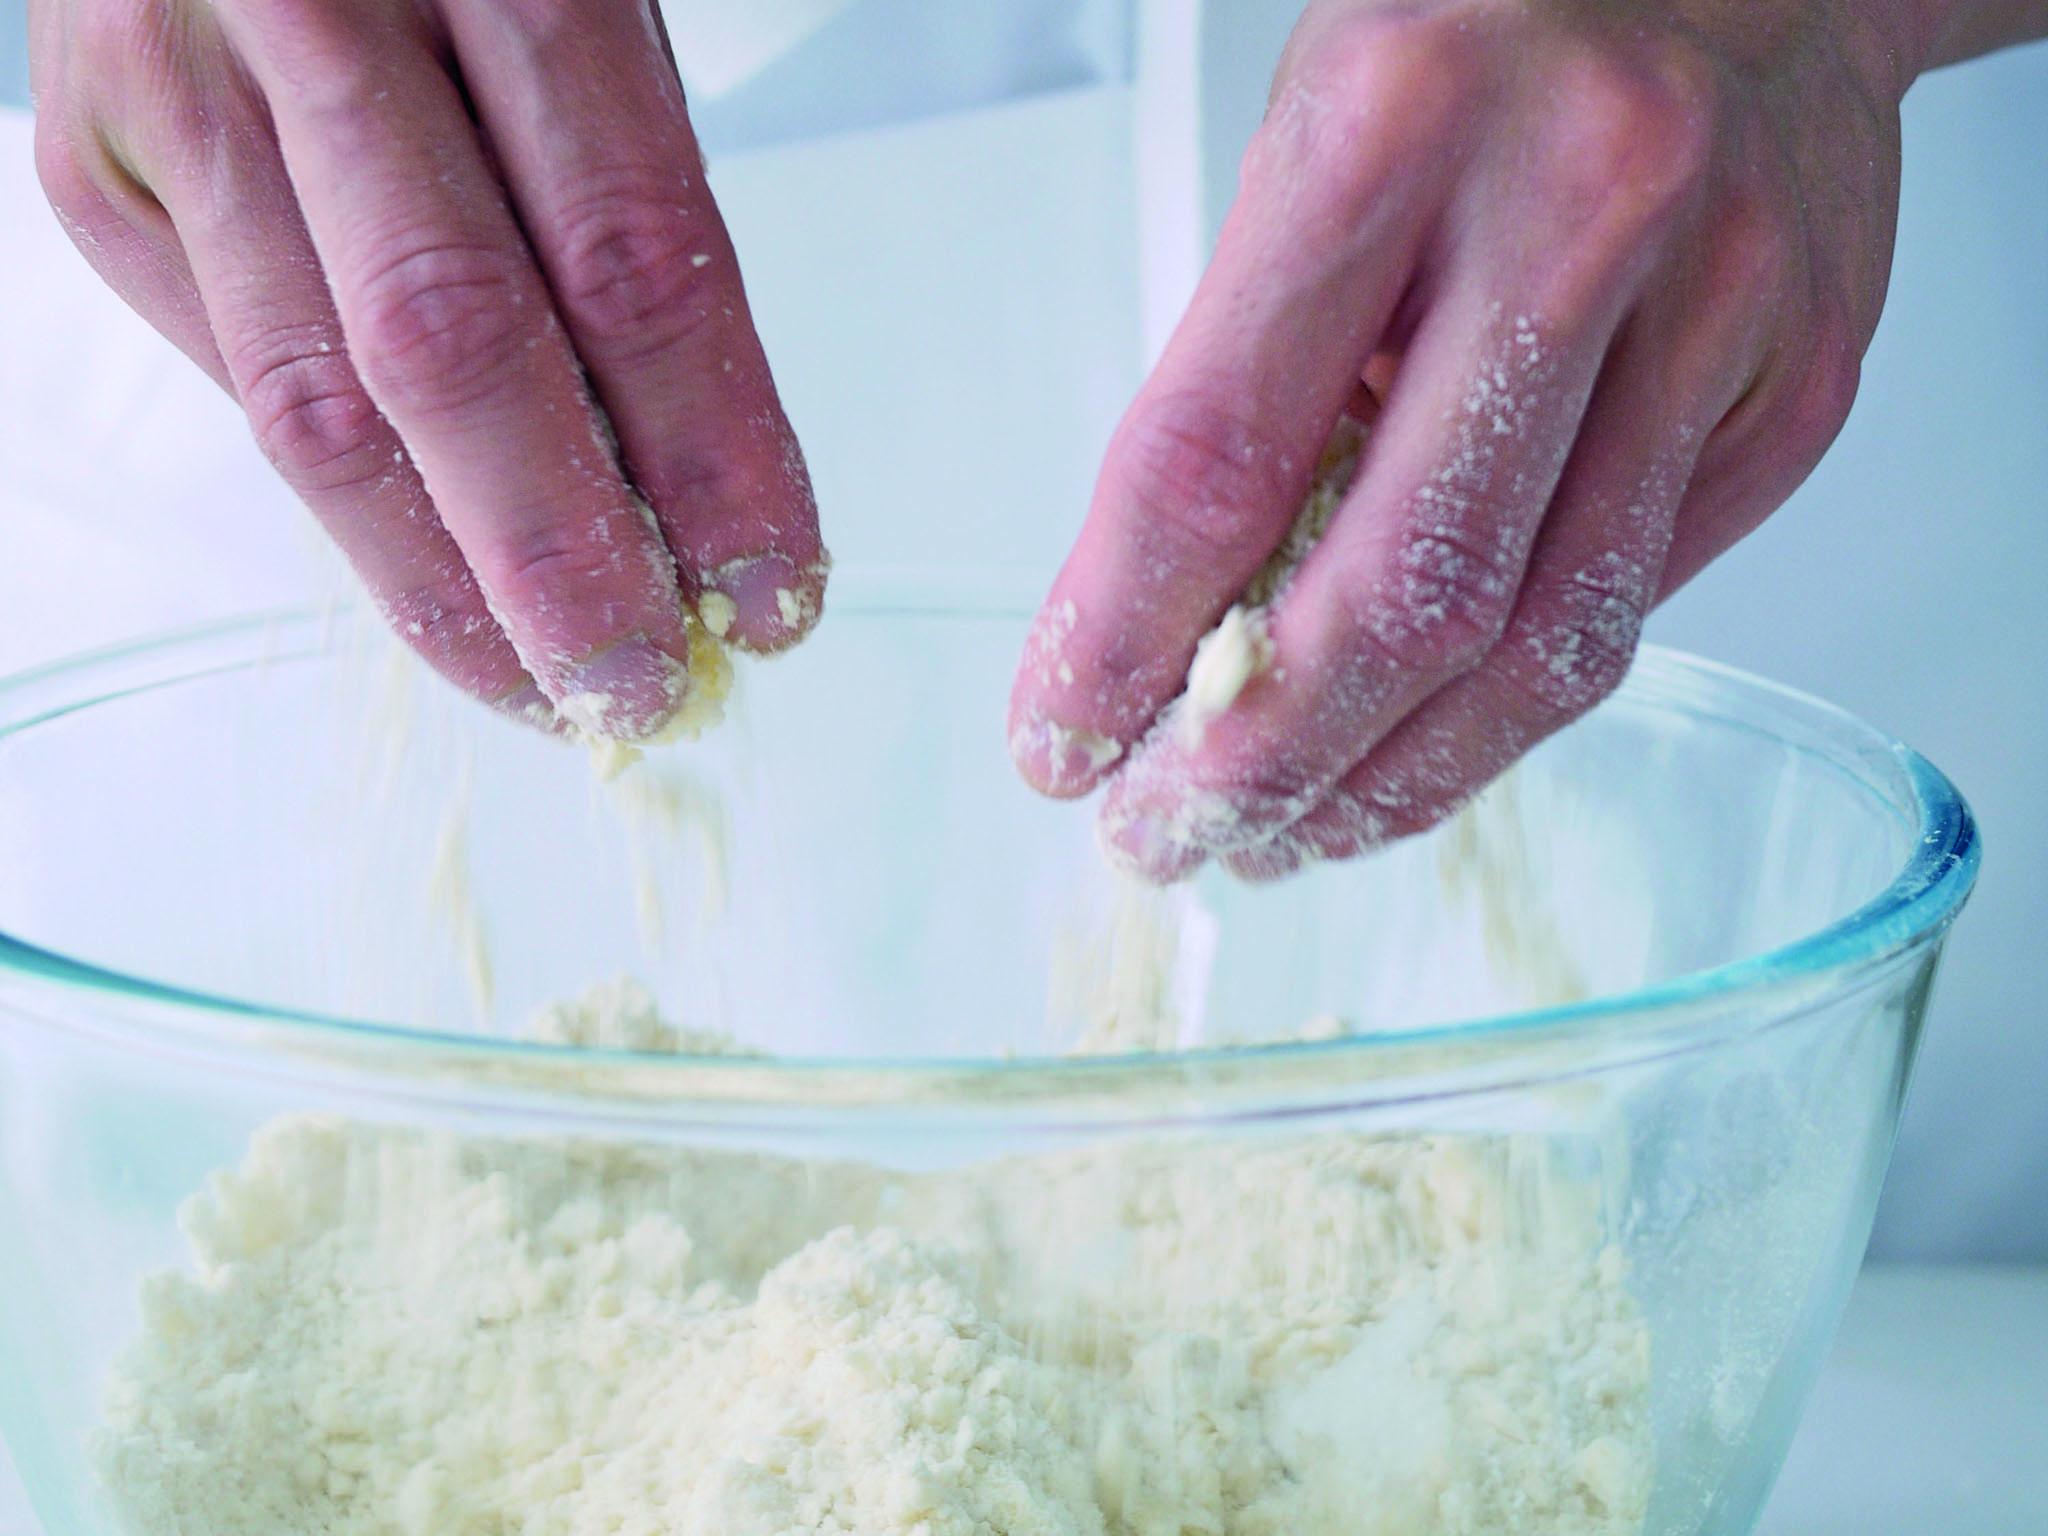 3. Once the butter’ broken down to small pea-sized pieces, use your fingertips to gently rub the little pieces of flour and butter together